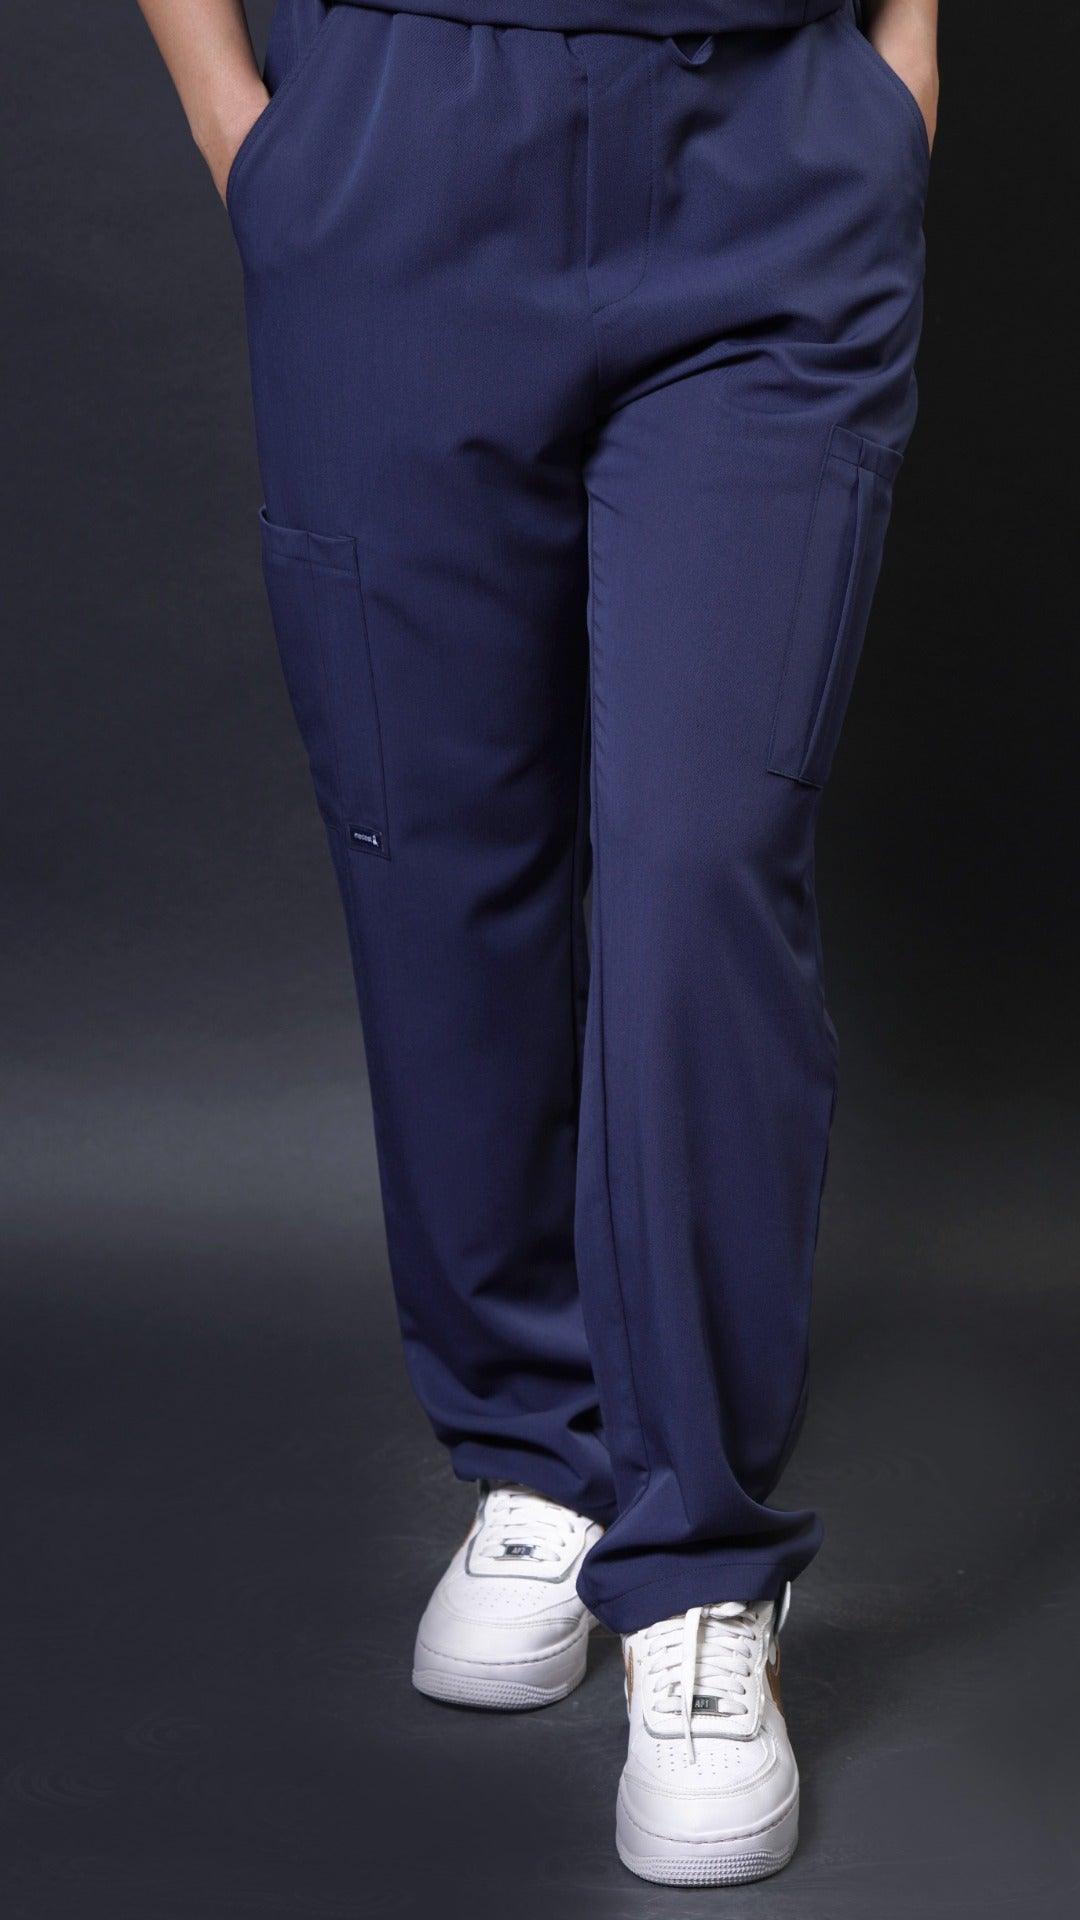 These navy blue scrub pants are straight cut and feature 6 pockets, 2 of which are cargo pockets. They're perfect for carrying all of your essential items with you while you're on the job.